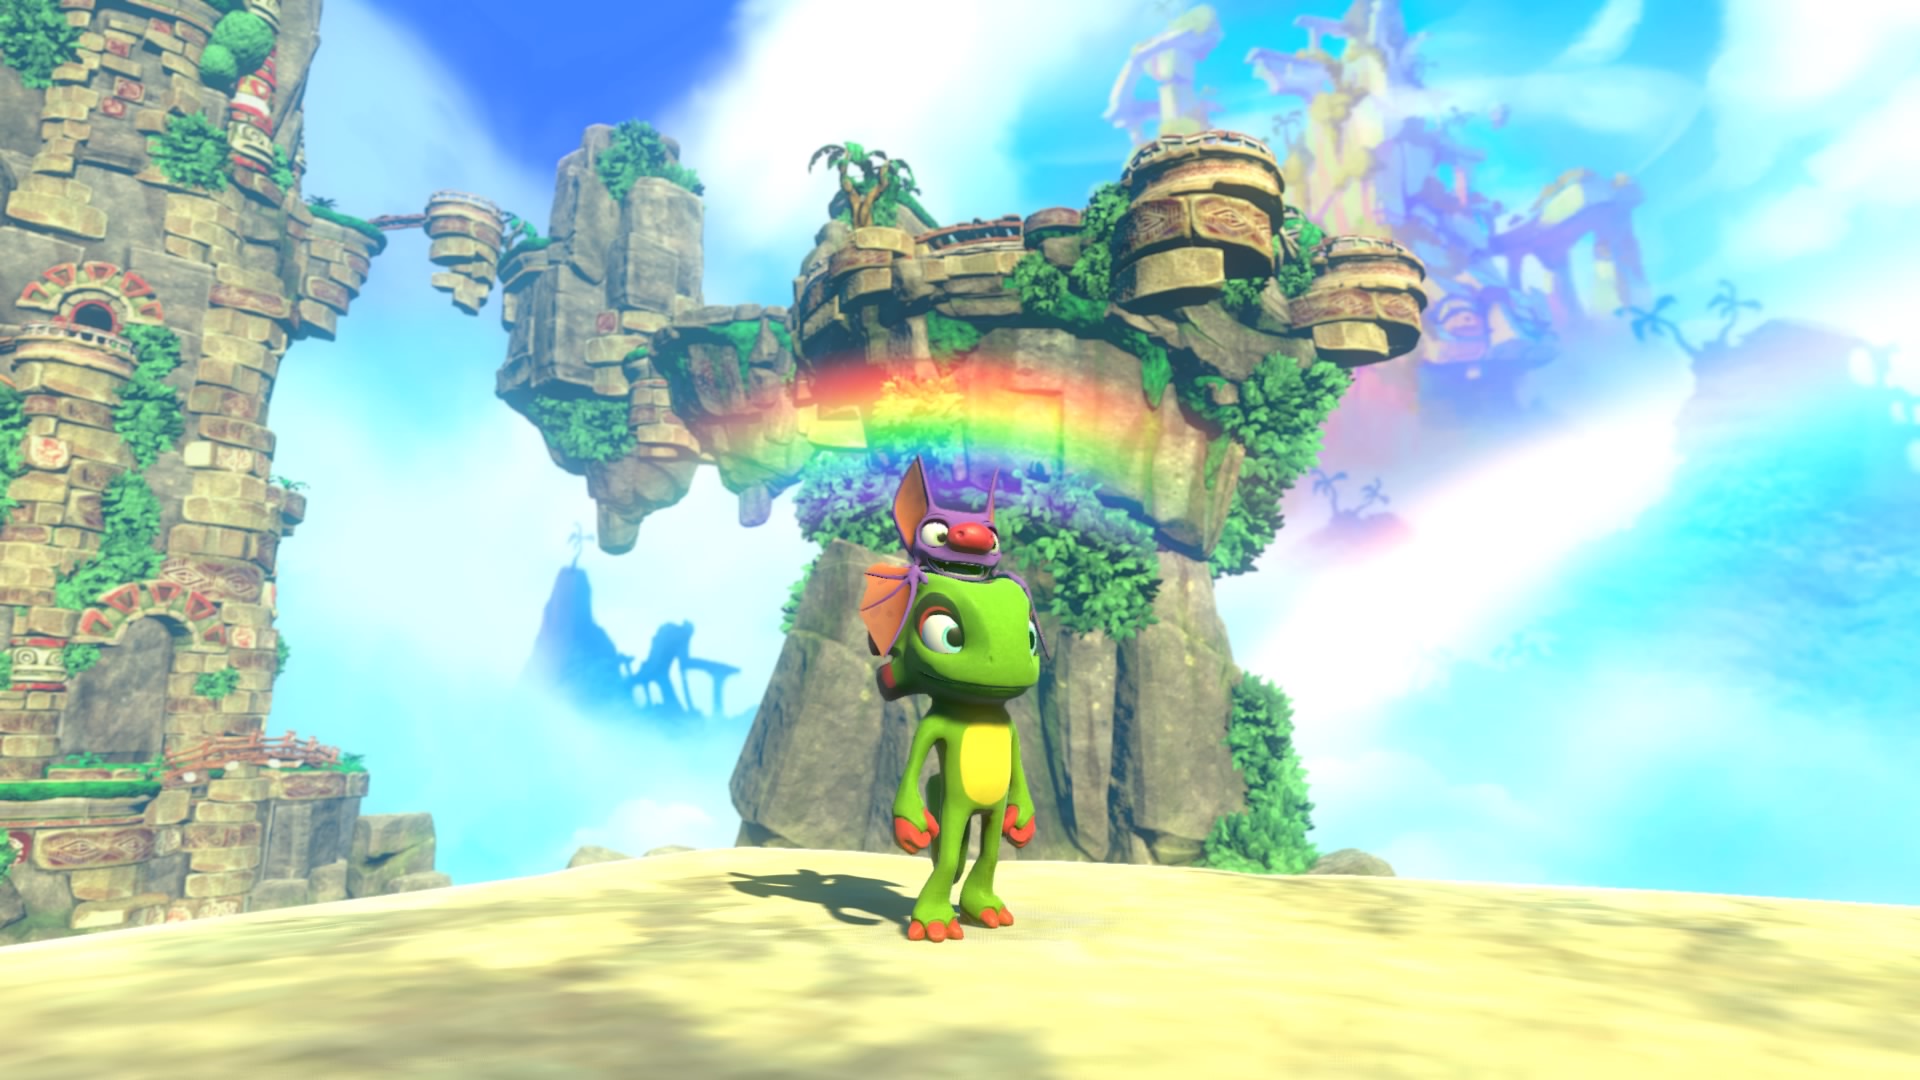 Yooka and Laylee stood beneath a rainbow in the first level.